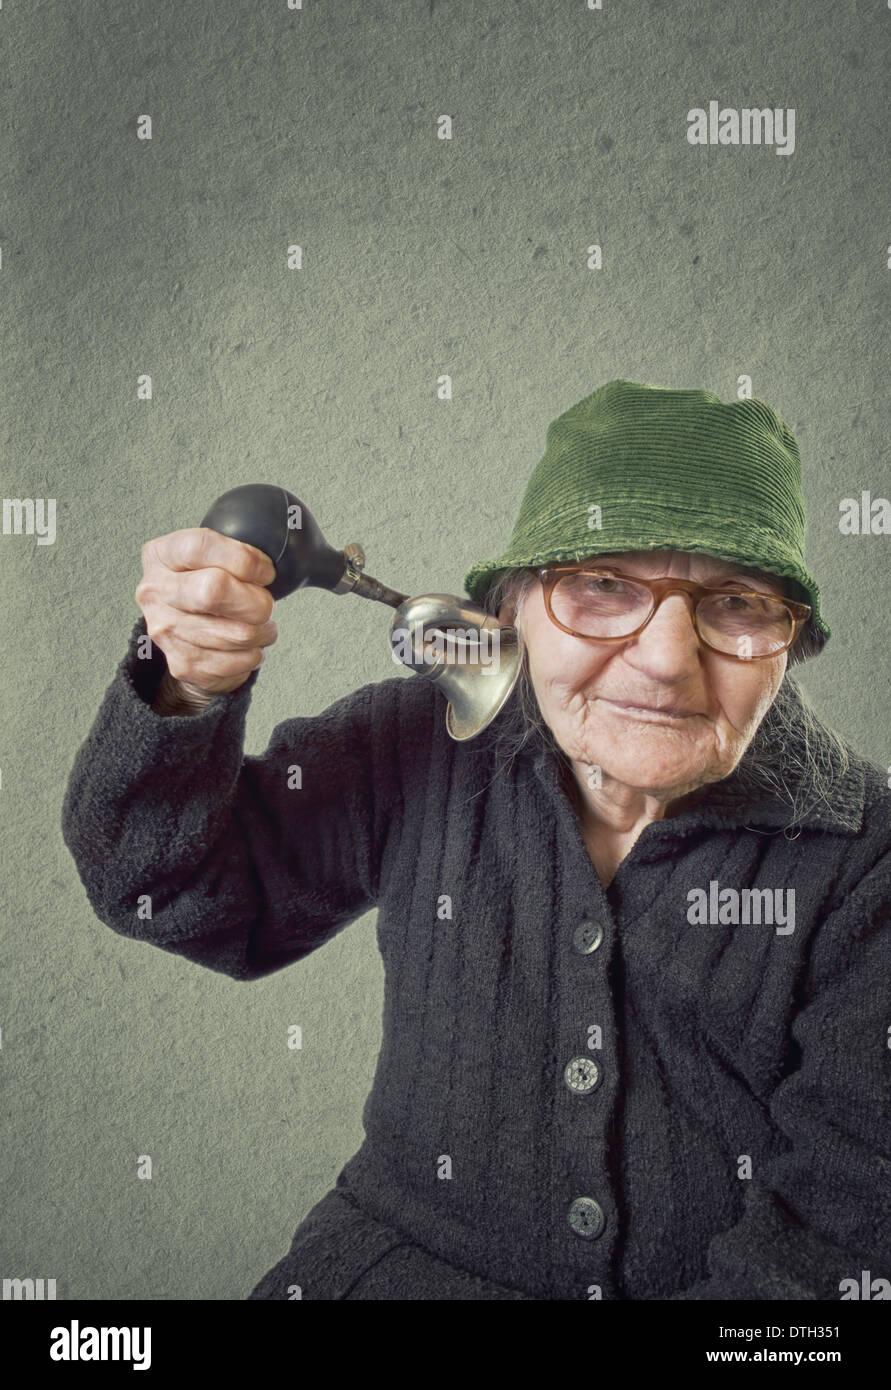 Elderly woman squeezing horn into her own ear on a vintage background. Stock Photo